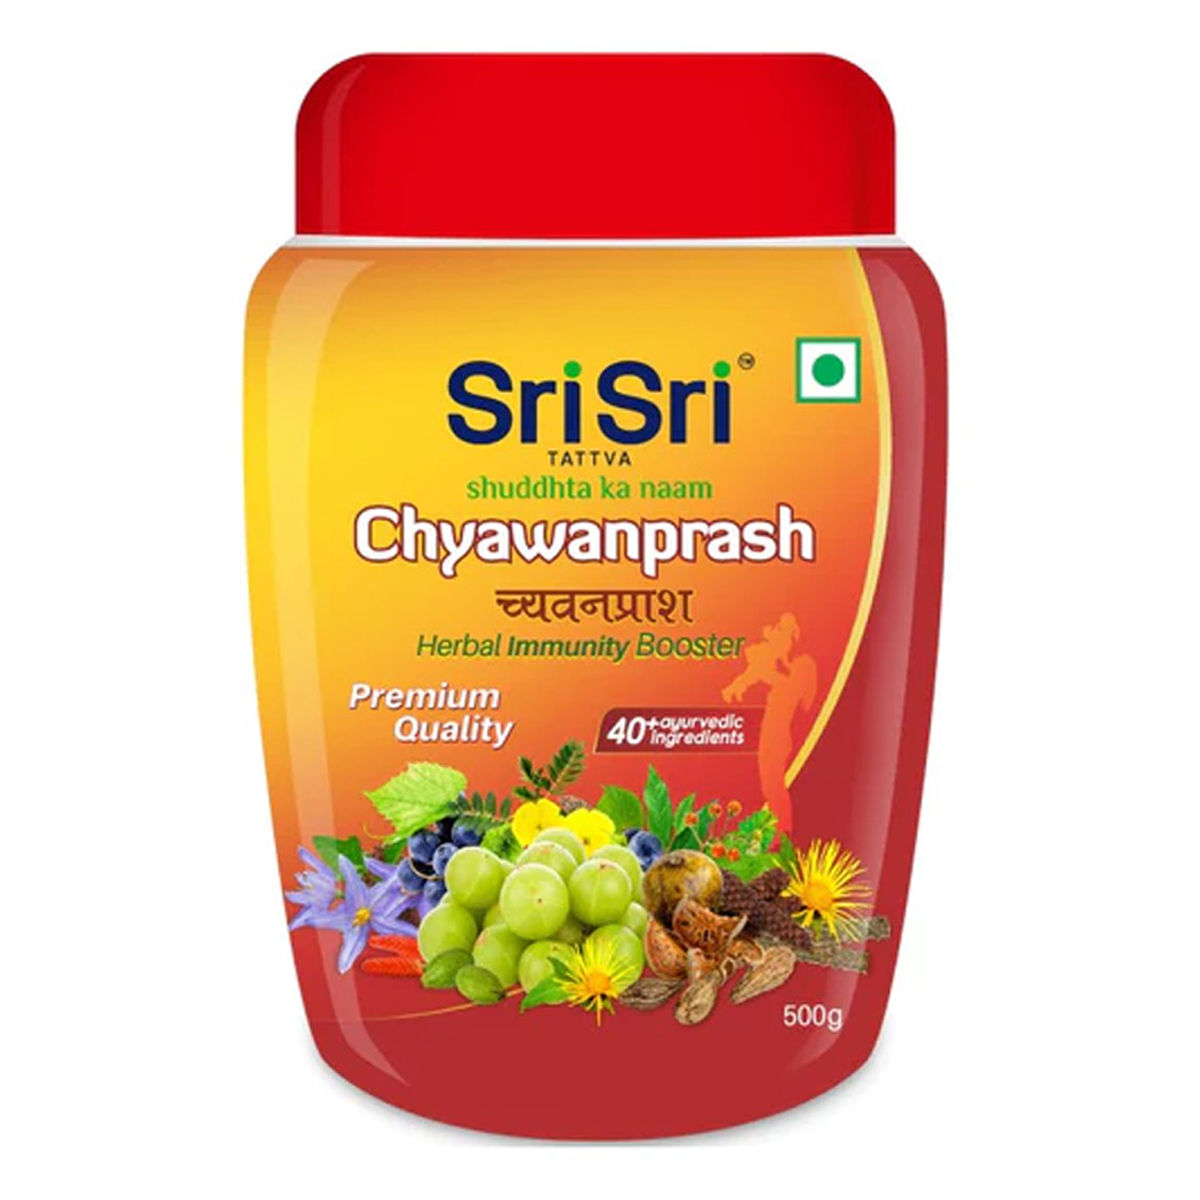 Here's Some Benefits, Uses & Ingredients of Chyawanprash